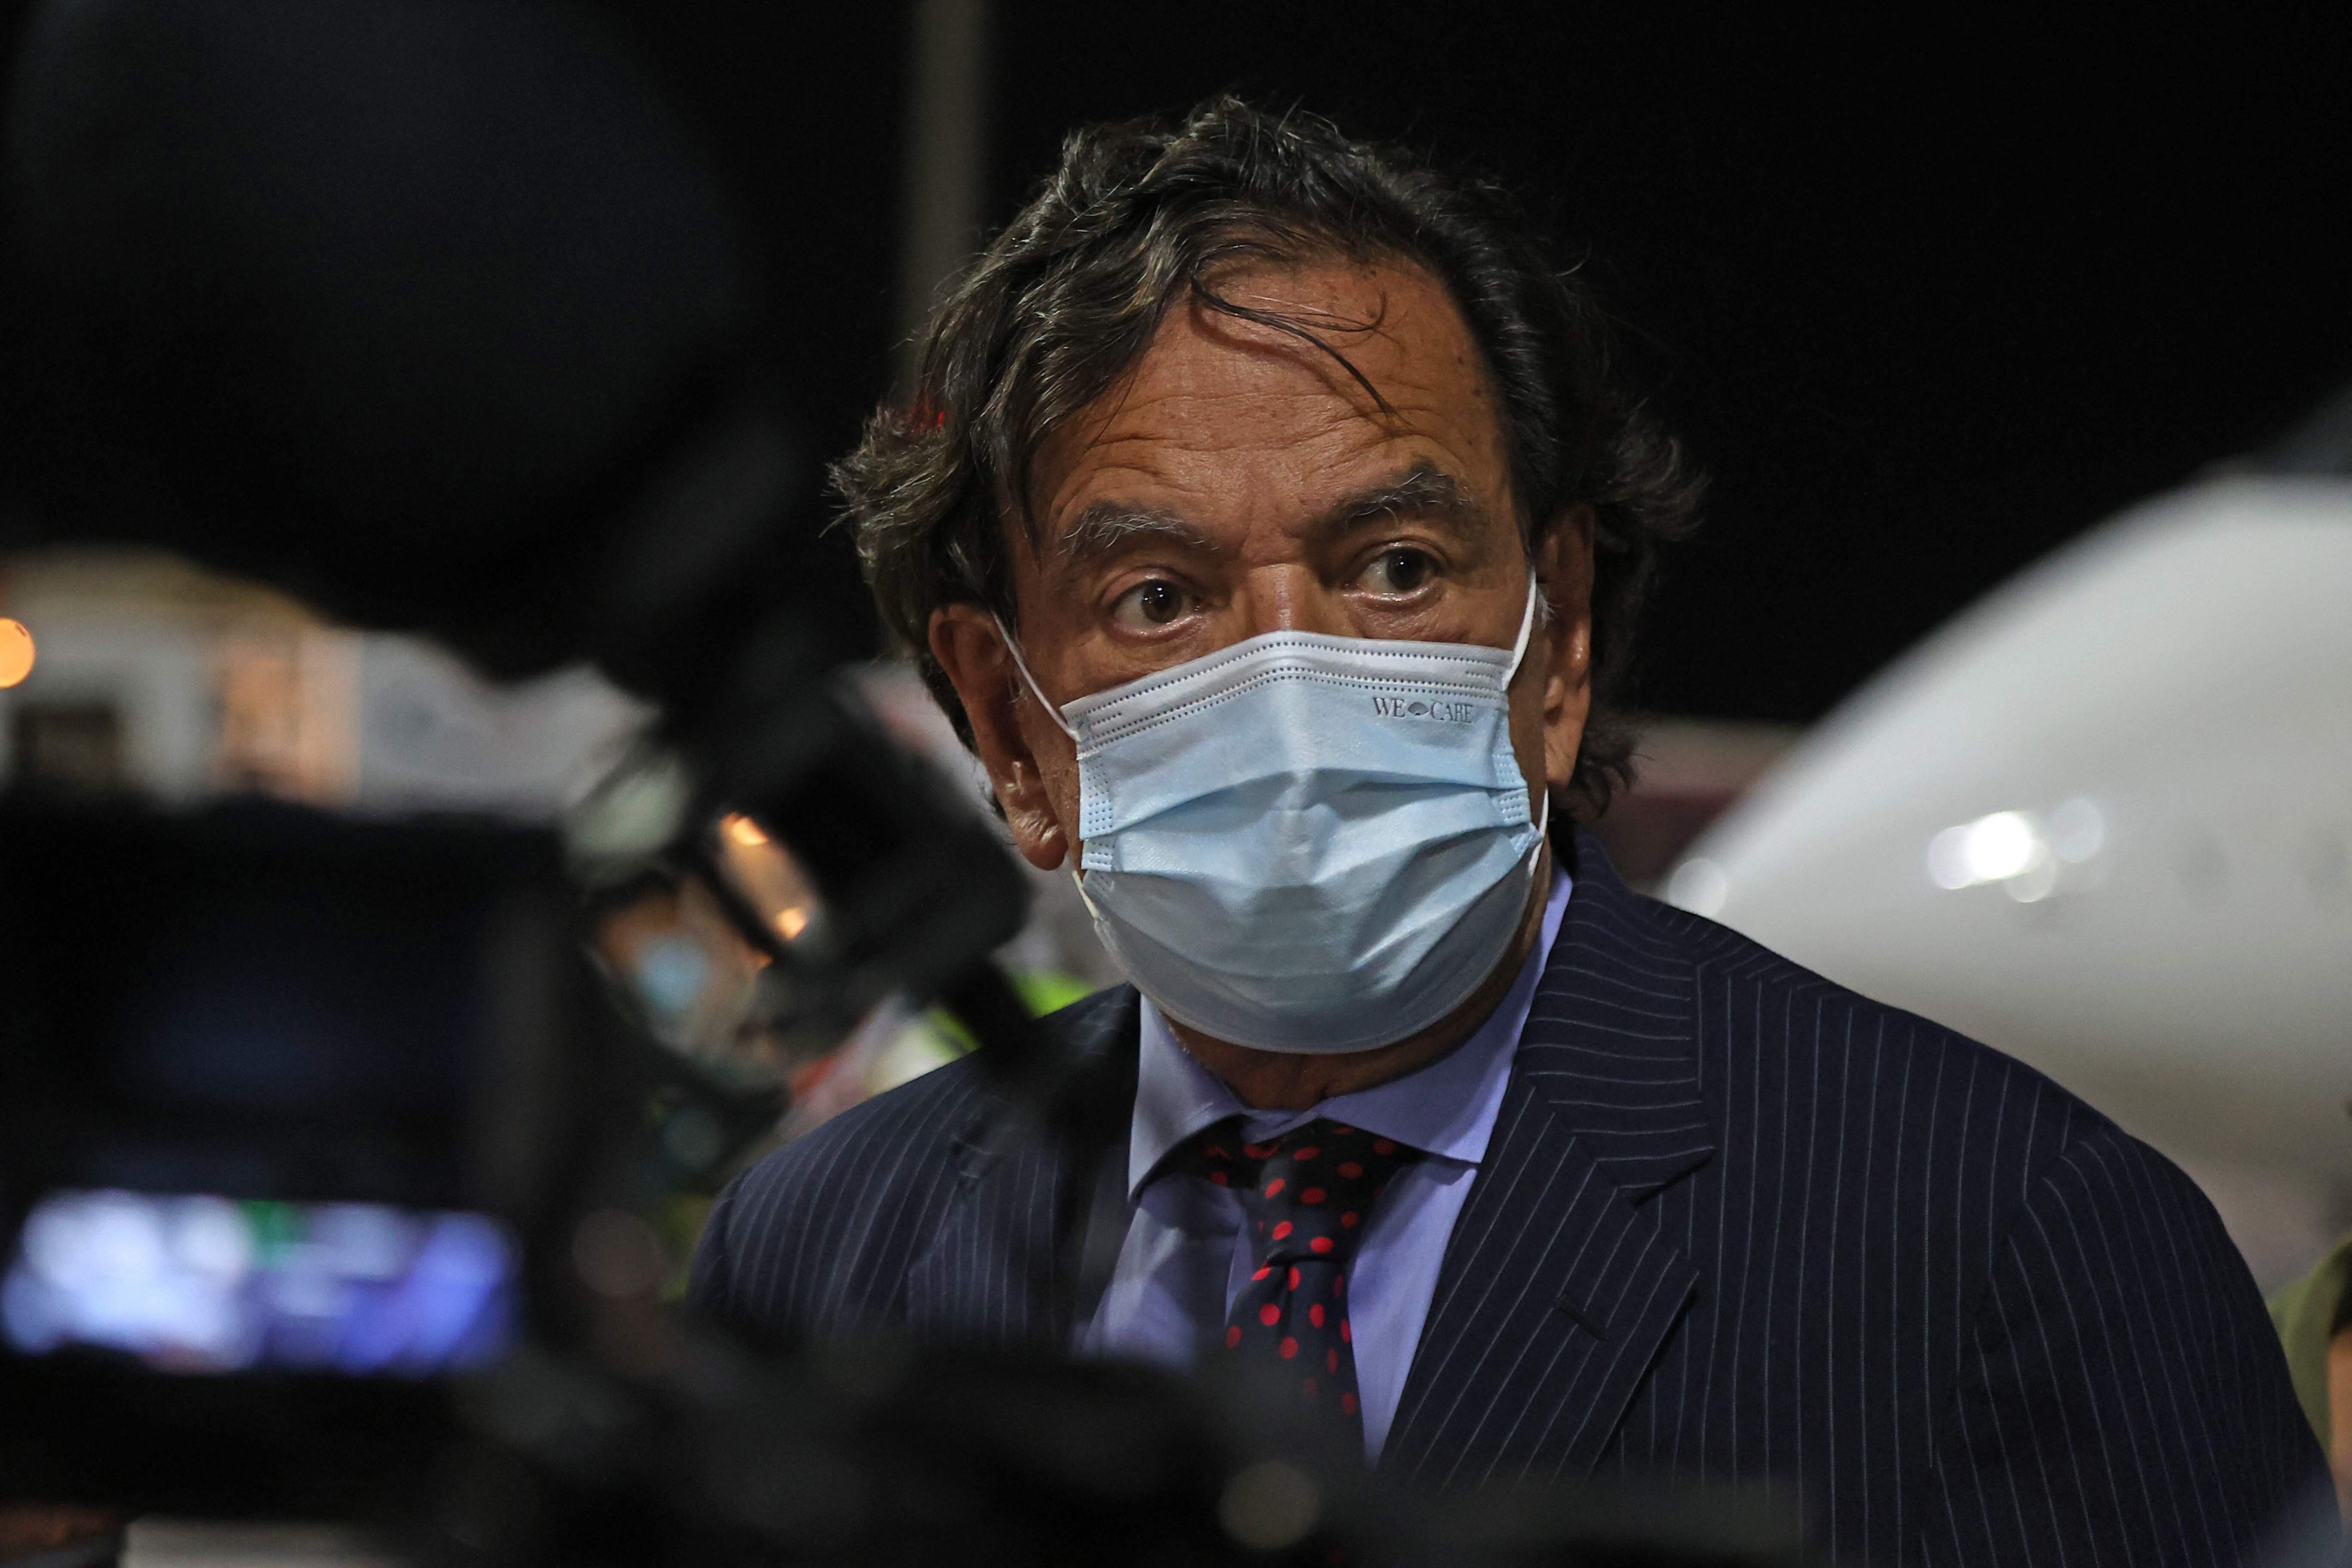 Former US diplomat Bill Richardson speaks to the media at Hamad International Airport in Qatar on Monday. Photo: AFP